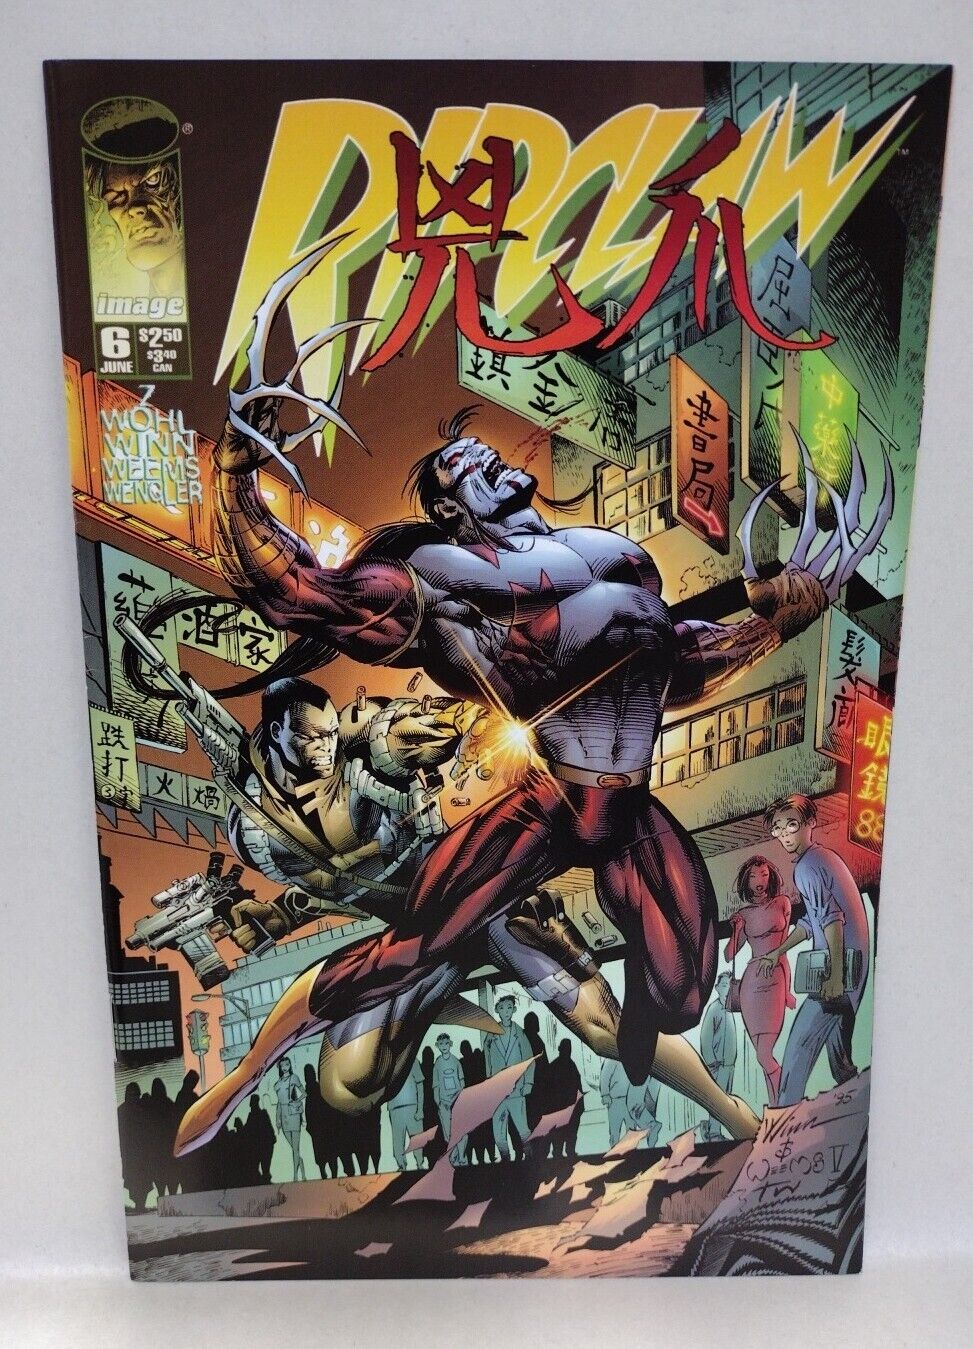 Ripclaw (1995) Image Top Cow Comic Lot Set 1 2 3 Special 1 Ongoing 1 3 4 5 6 